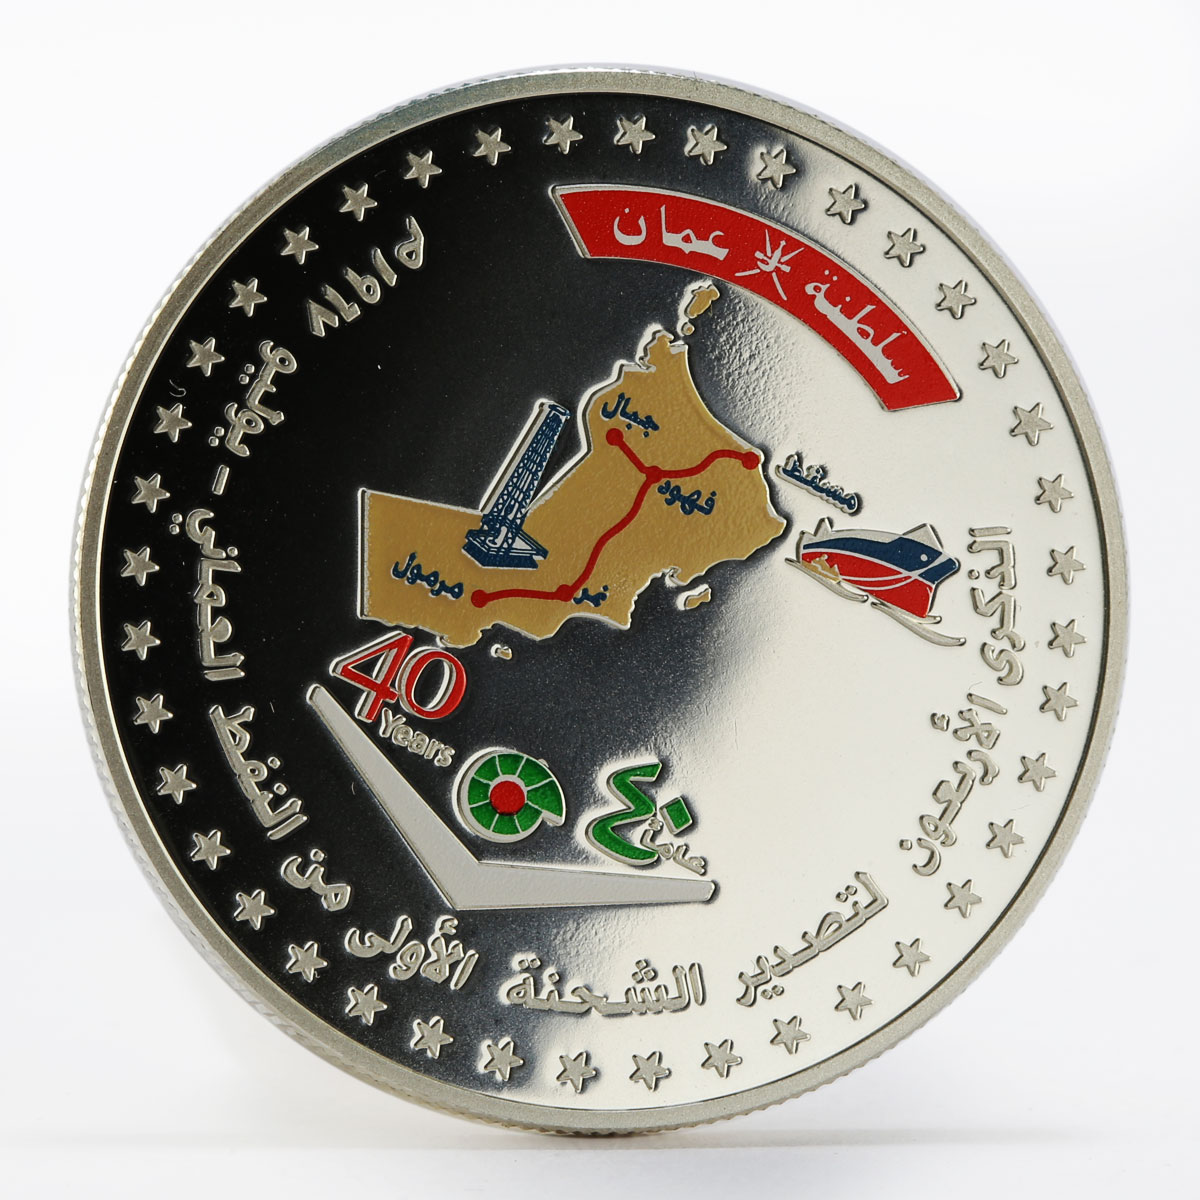 Oman 1 rial 40th Anniversary First Oil Export coloured proof silver coin 2007